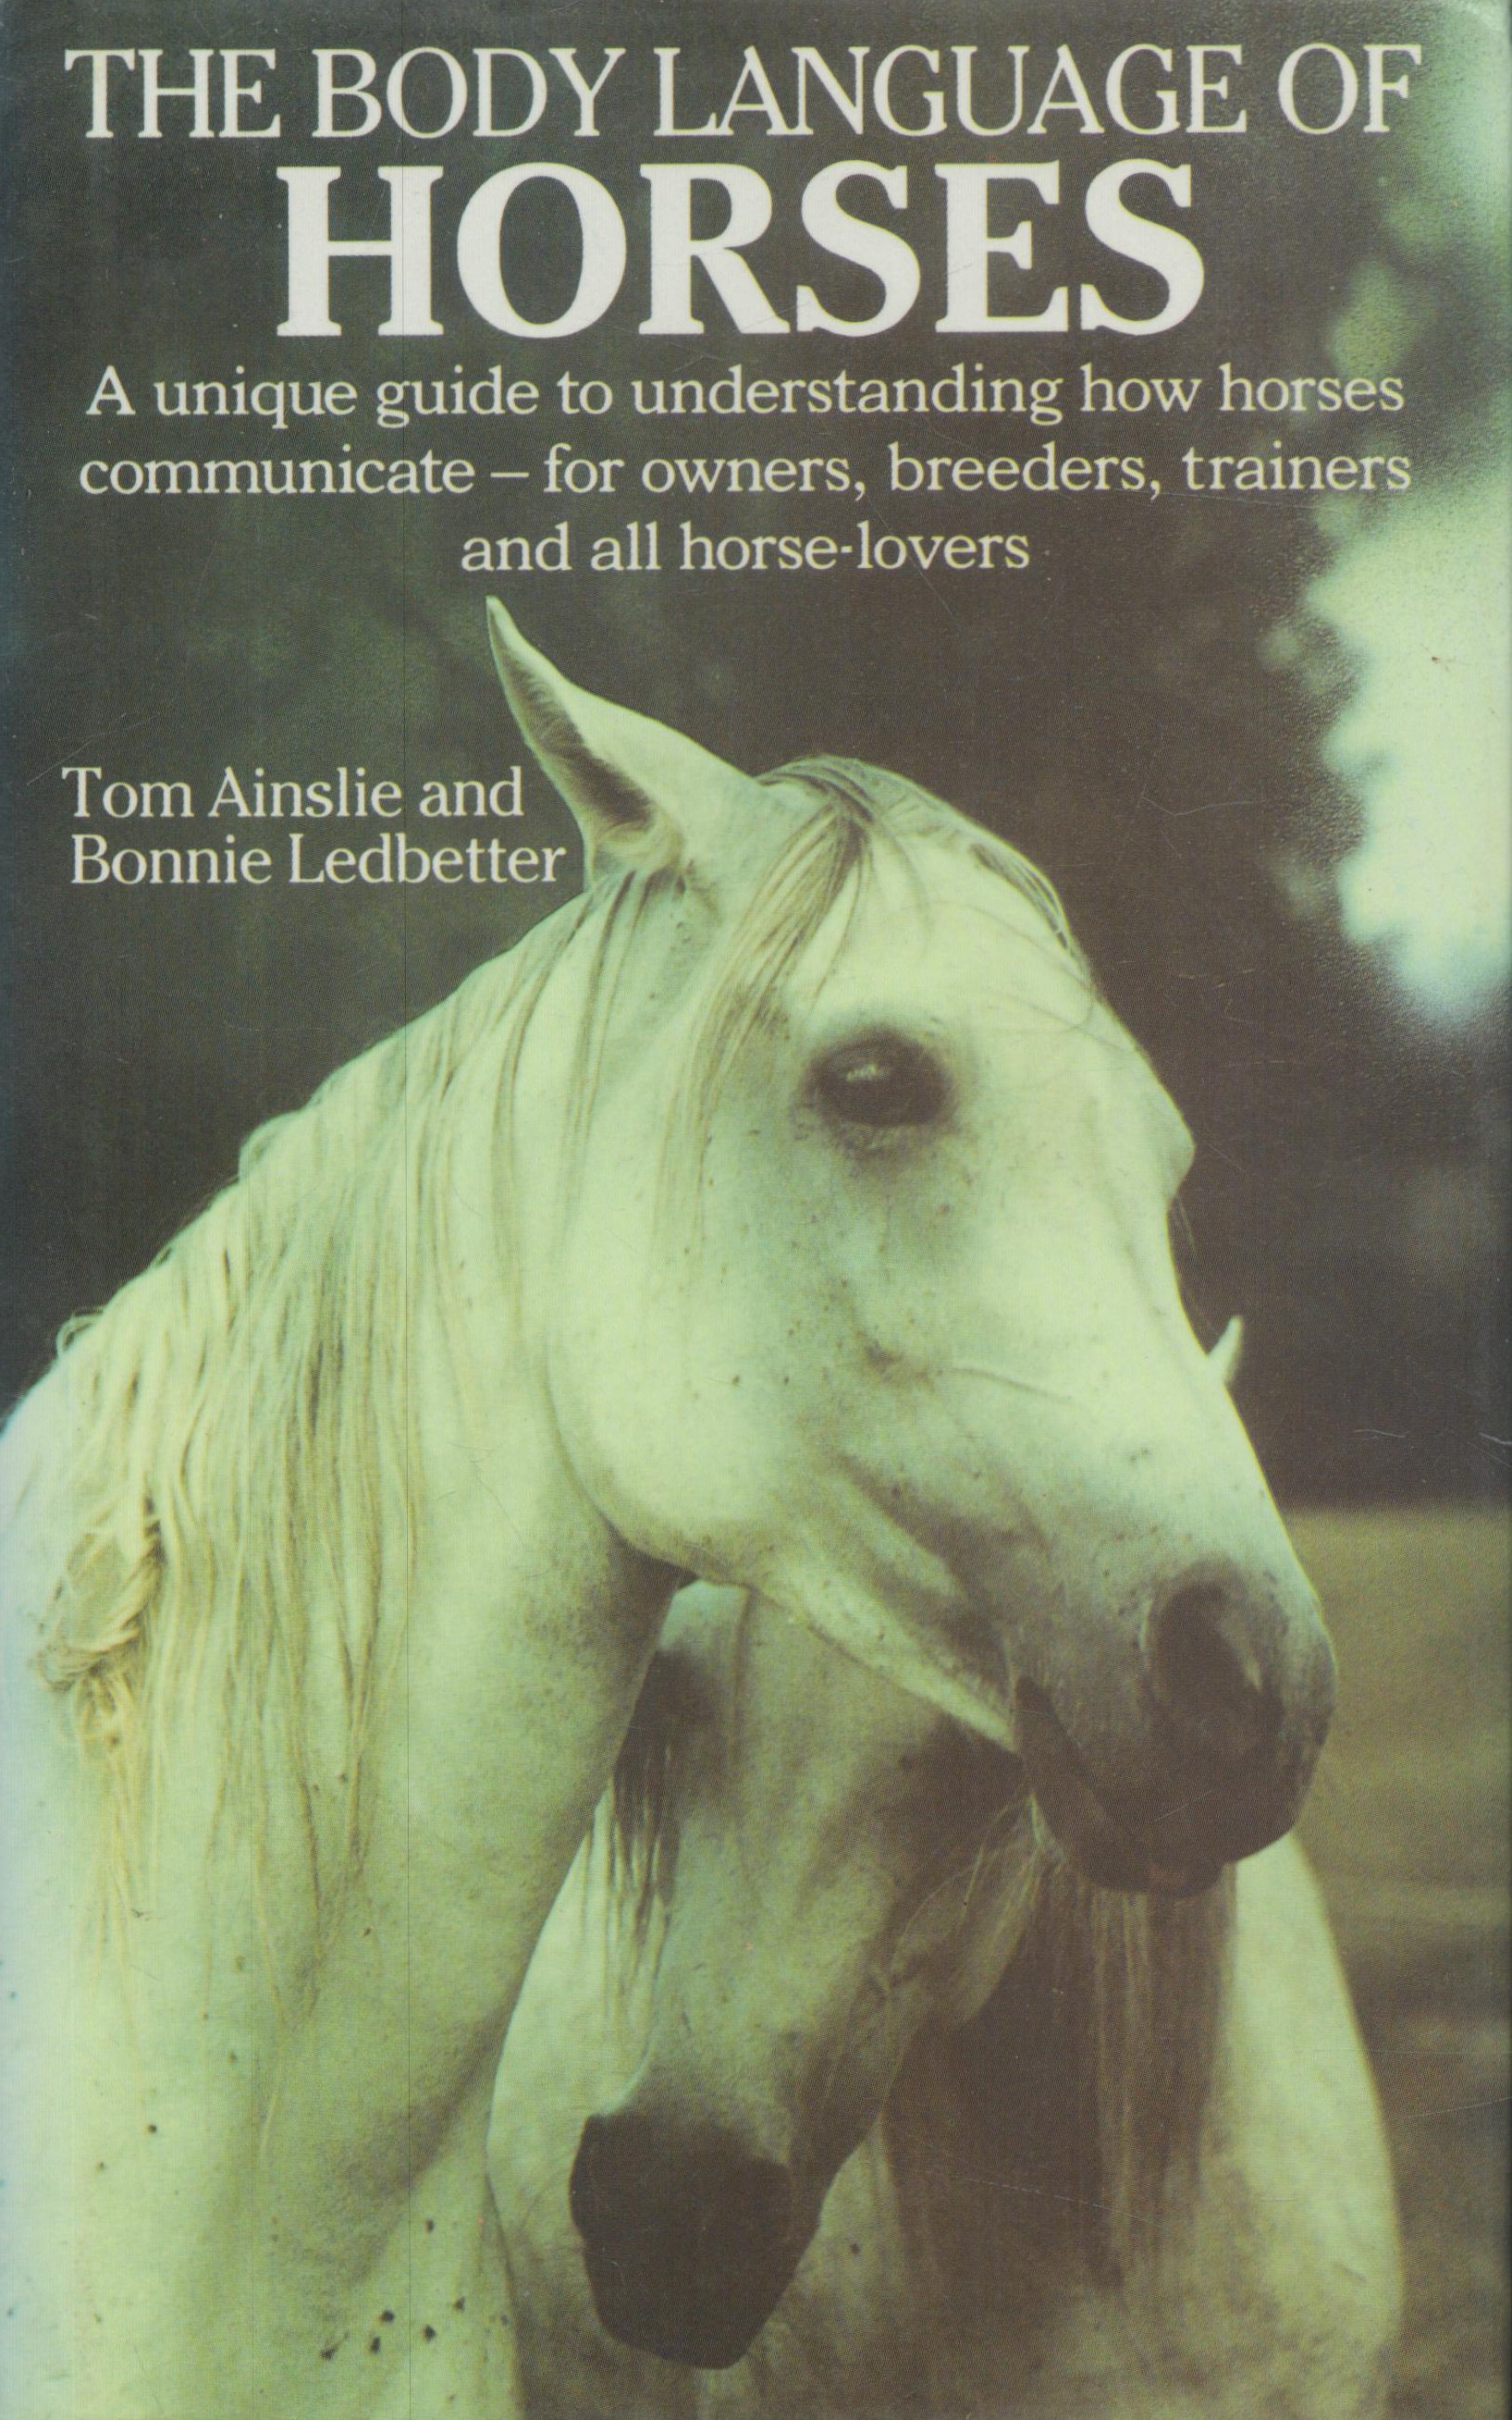 The Body Language of Horses by Tom Ainslie and Bonnie Ledbetter 1987 hardback book with 218 pages,